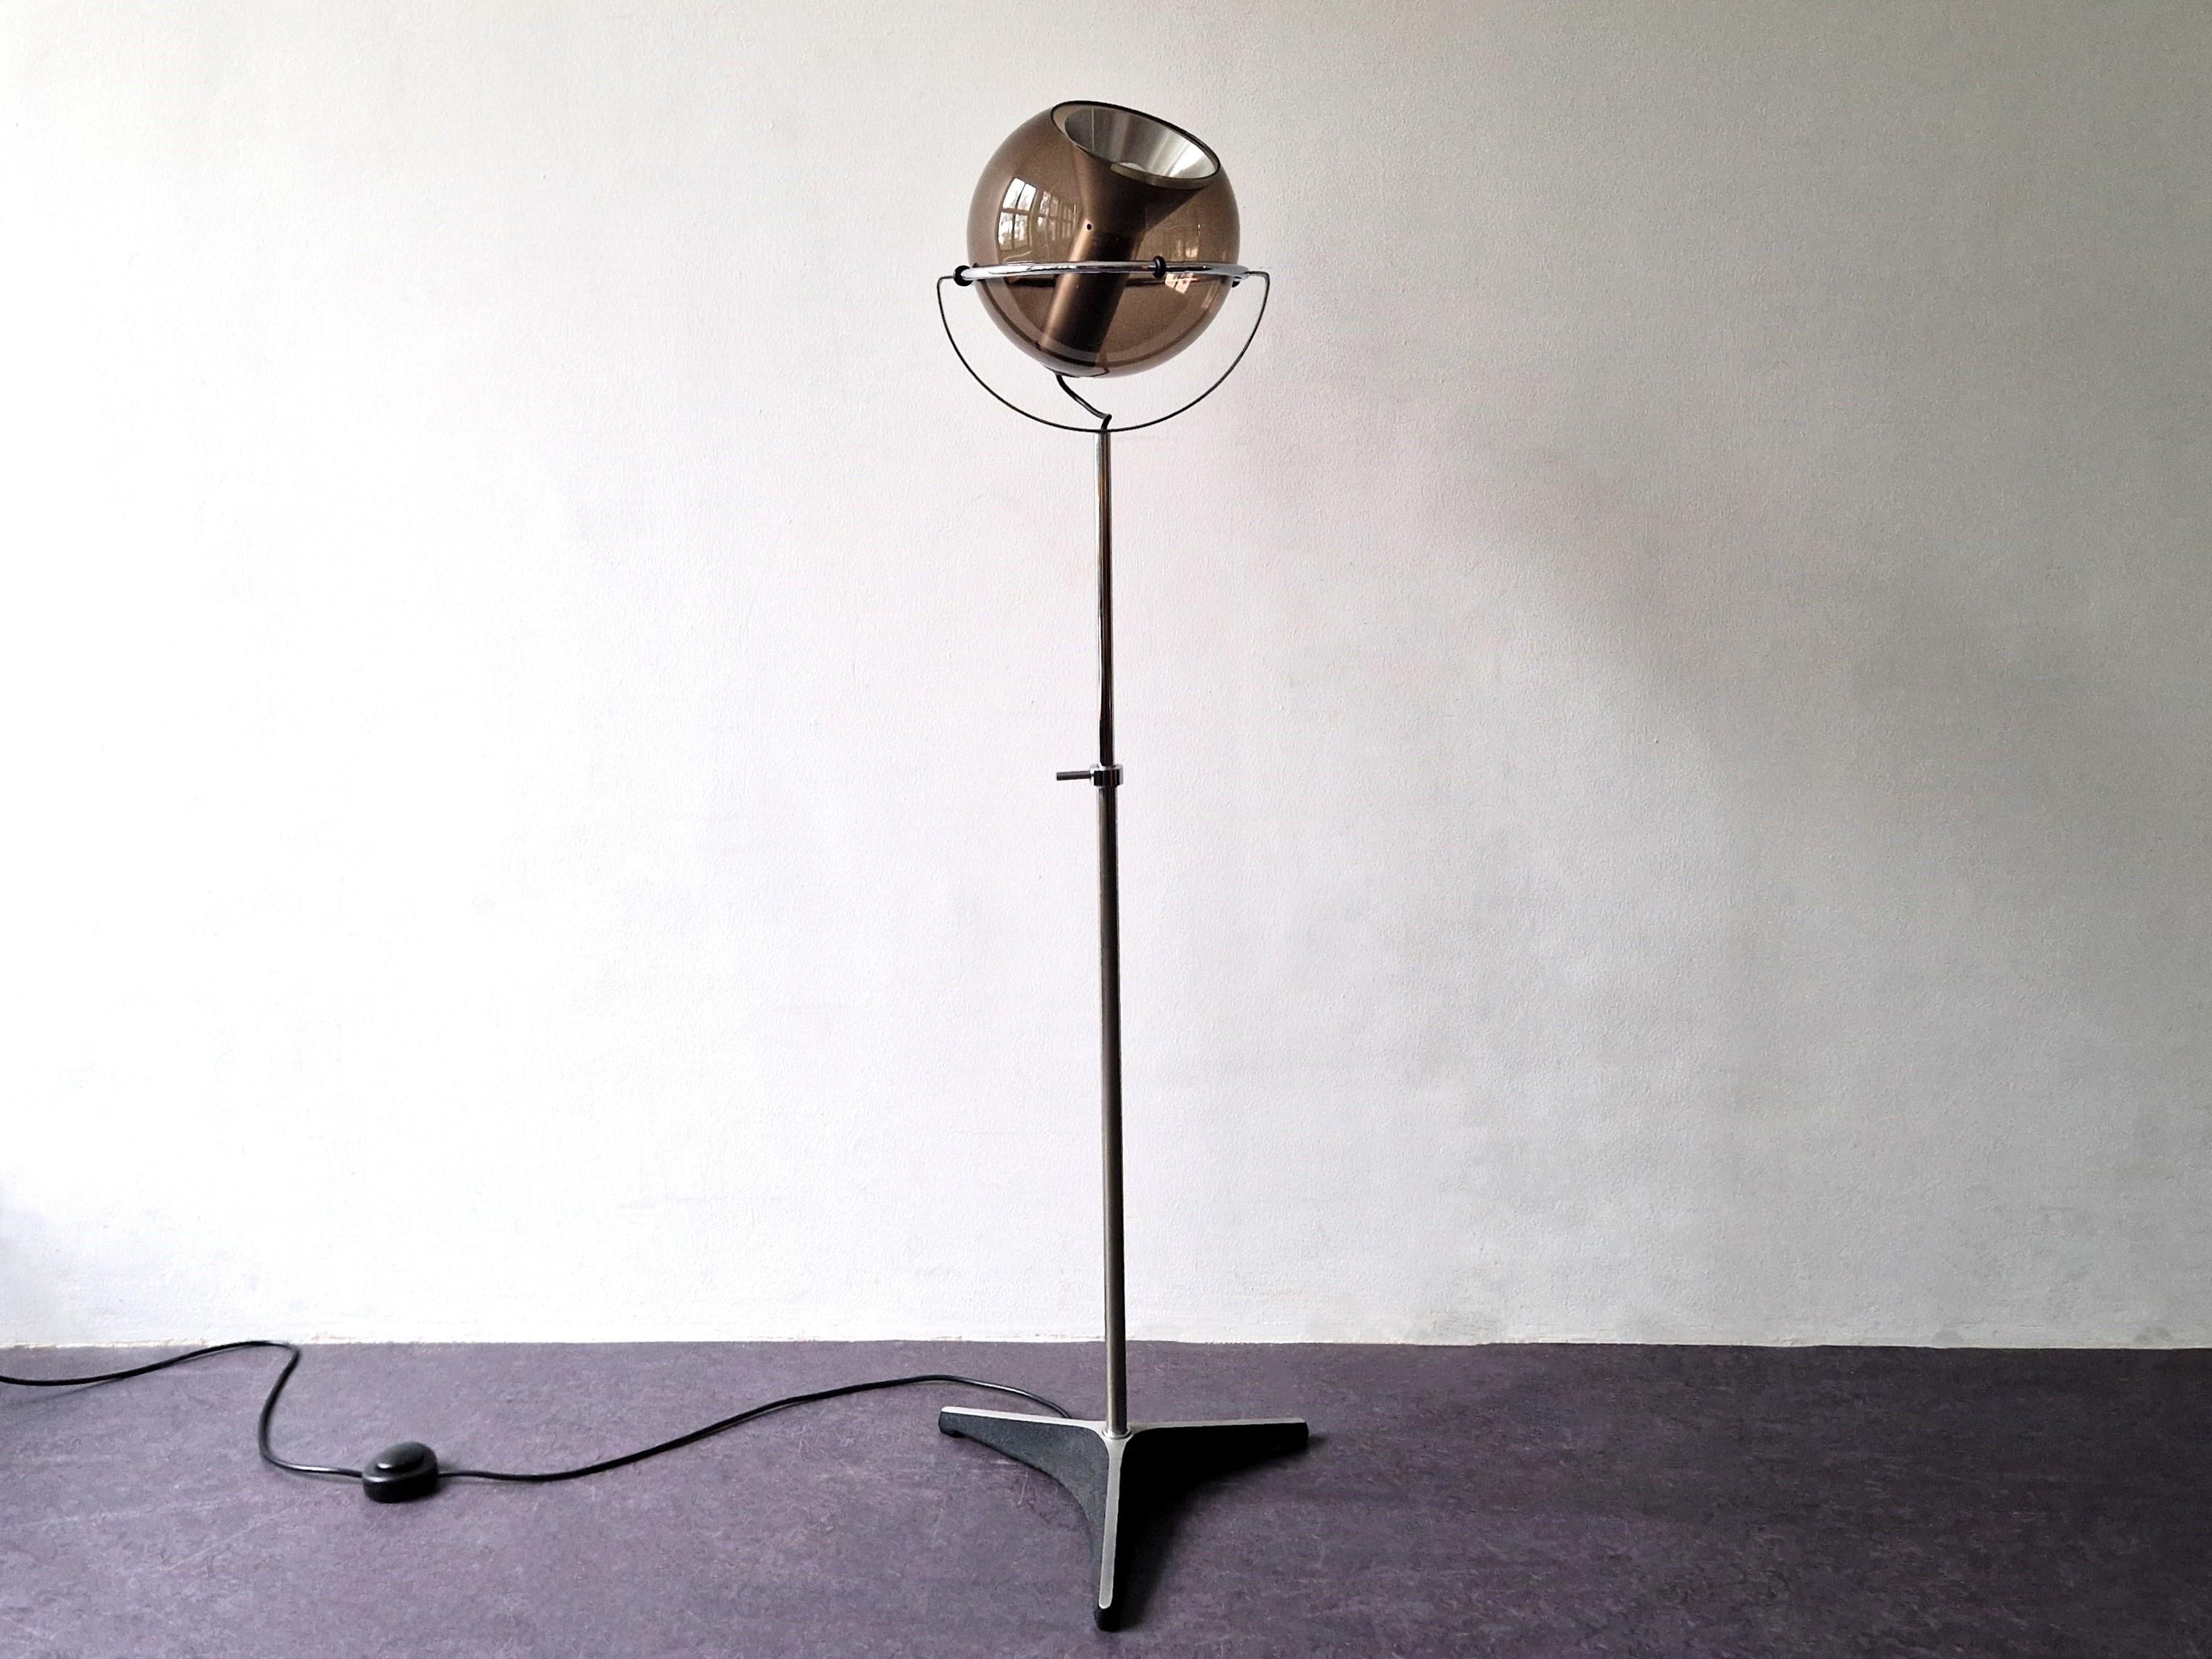 The 'Globe D-2000' floor lamp was designed by Frank Ligtelijn for Raak Amsterdam in the late 1950's. It has a classical smoked glass globe, with an aluminum reflector and lamp holder, standing on a chromed metal adjustable rod and cast iron tripod